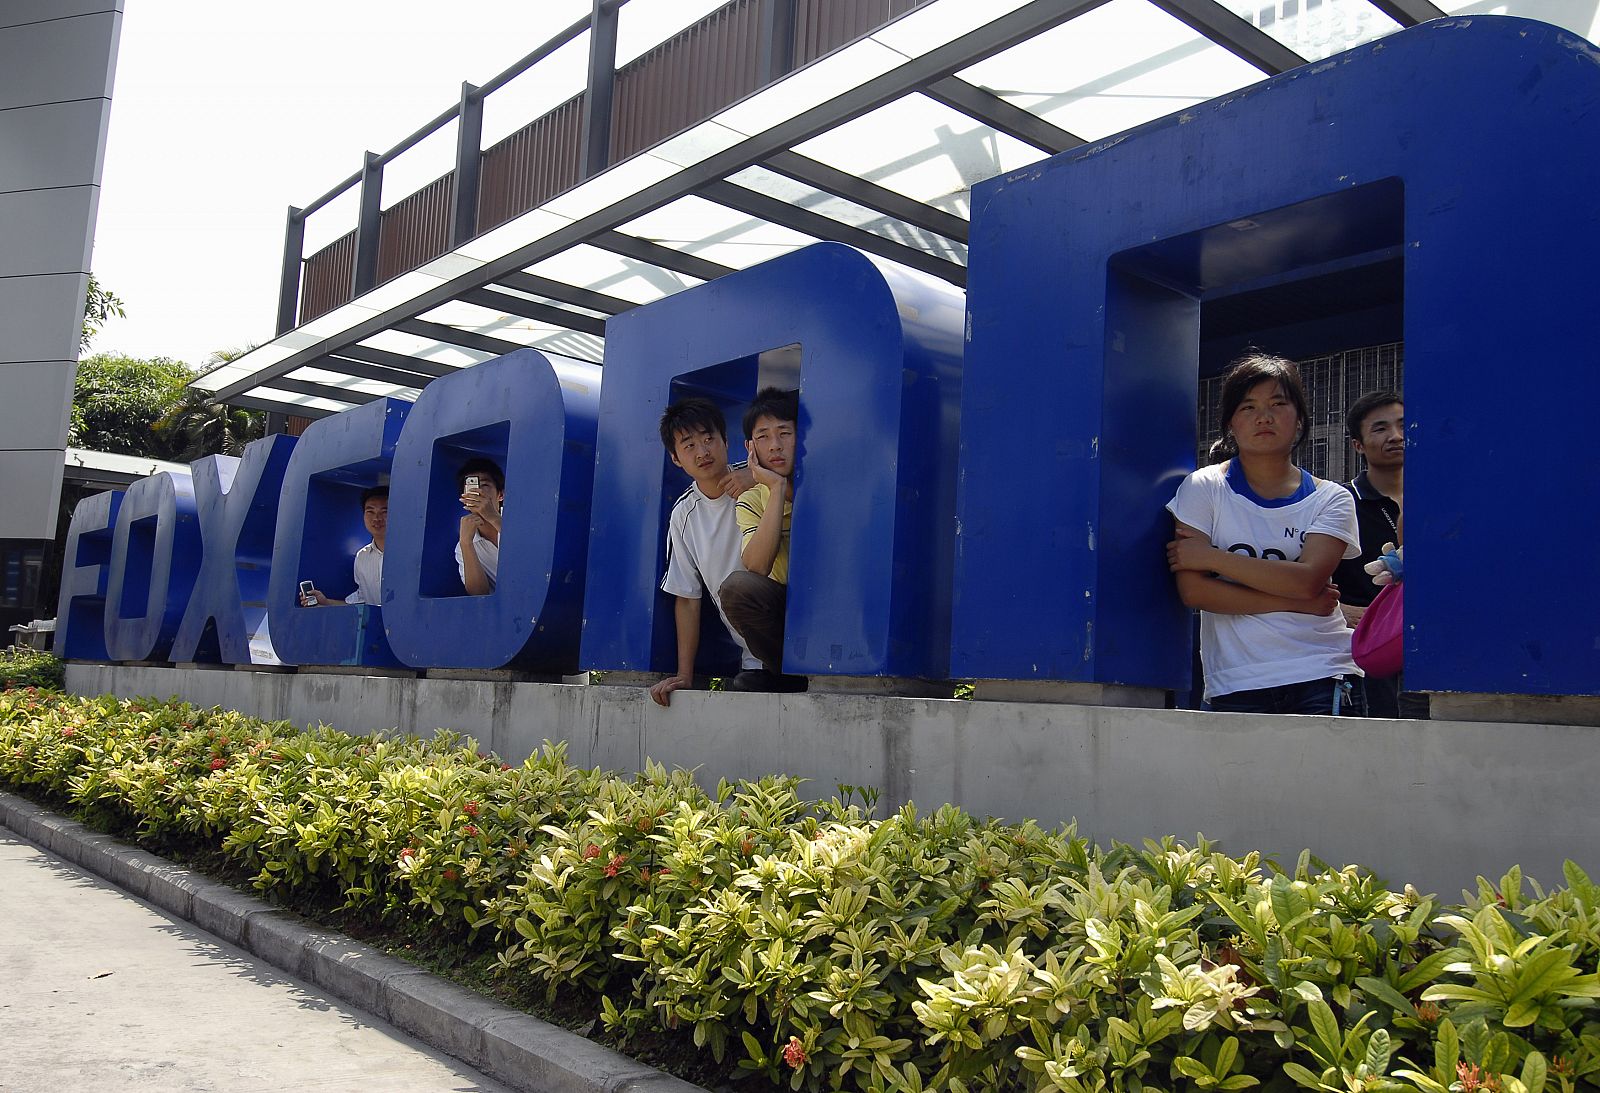 Workers stand at the gate of a Foxconn factory in the township of Longhua in Shenzhen